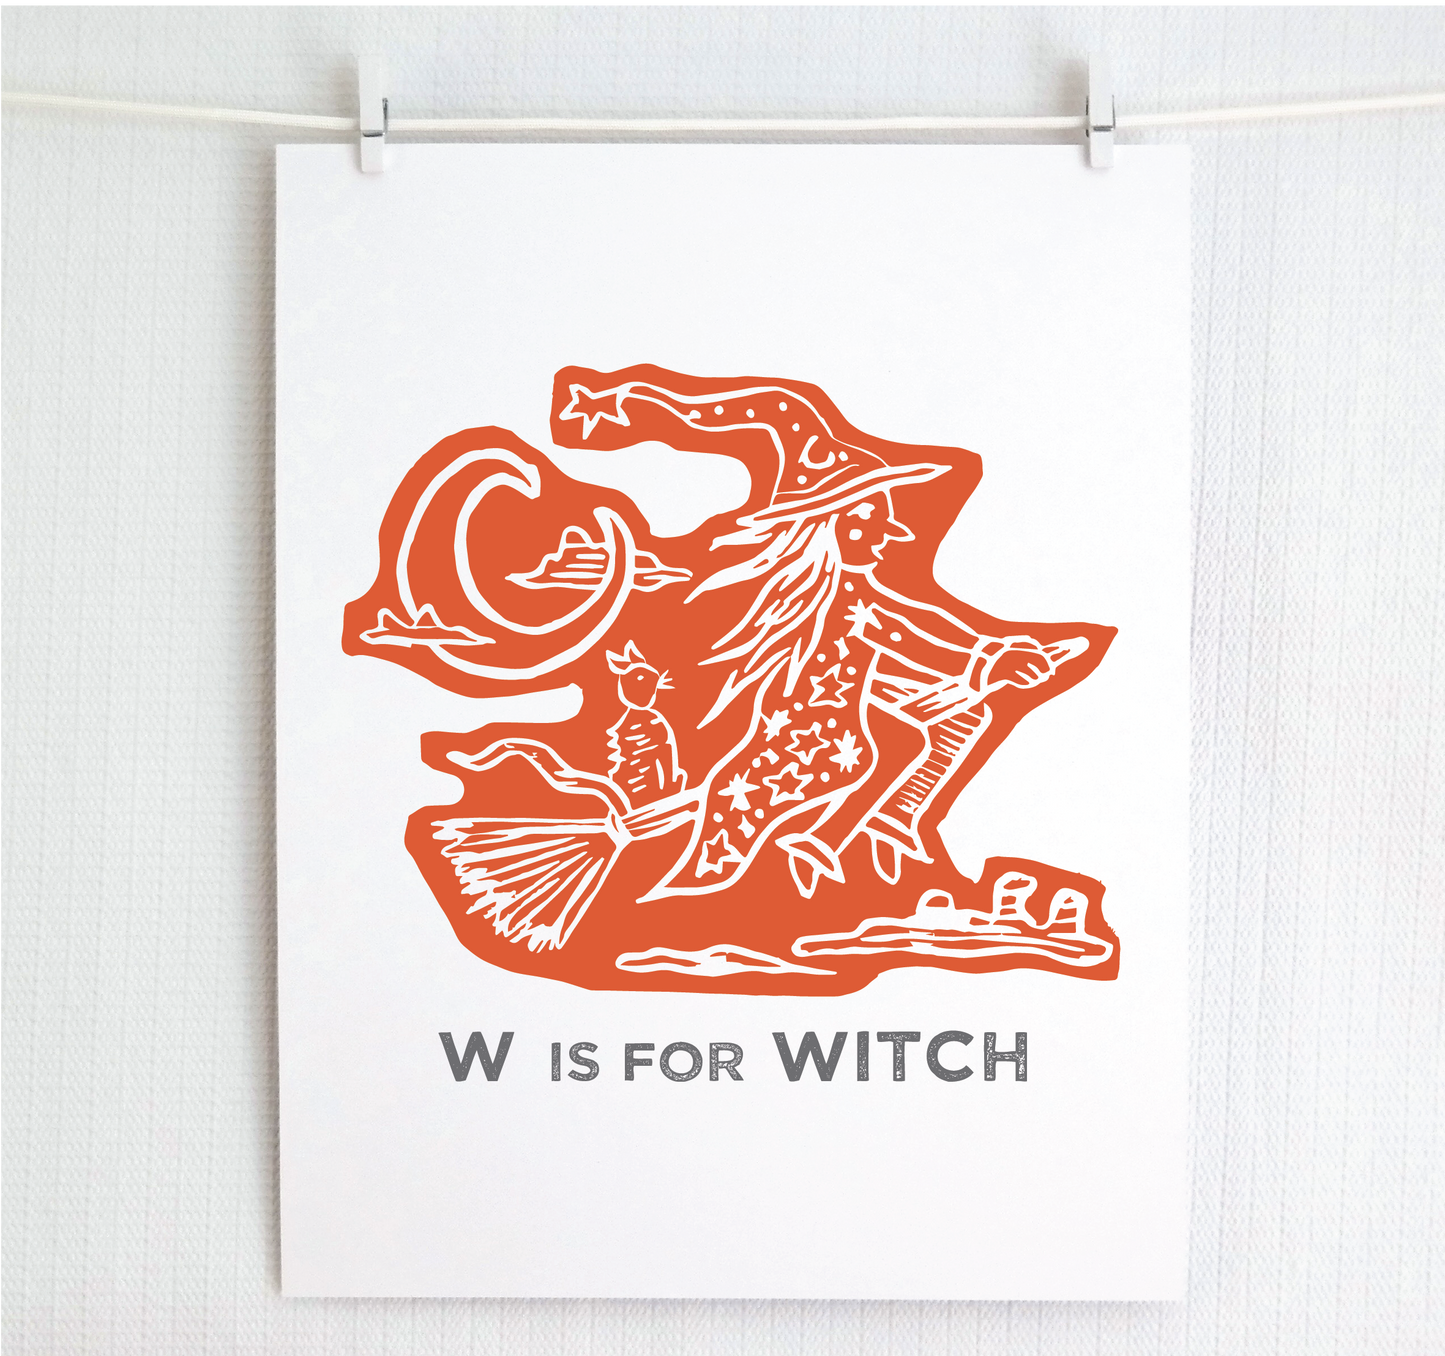 W is for Witch